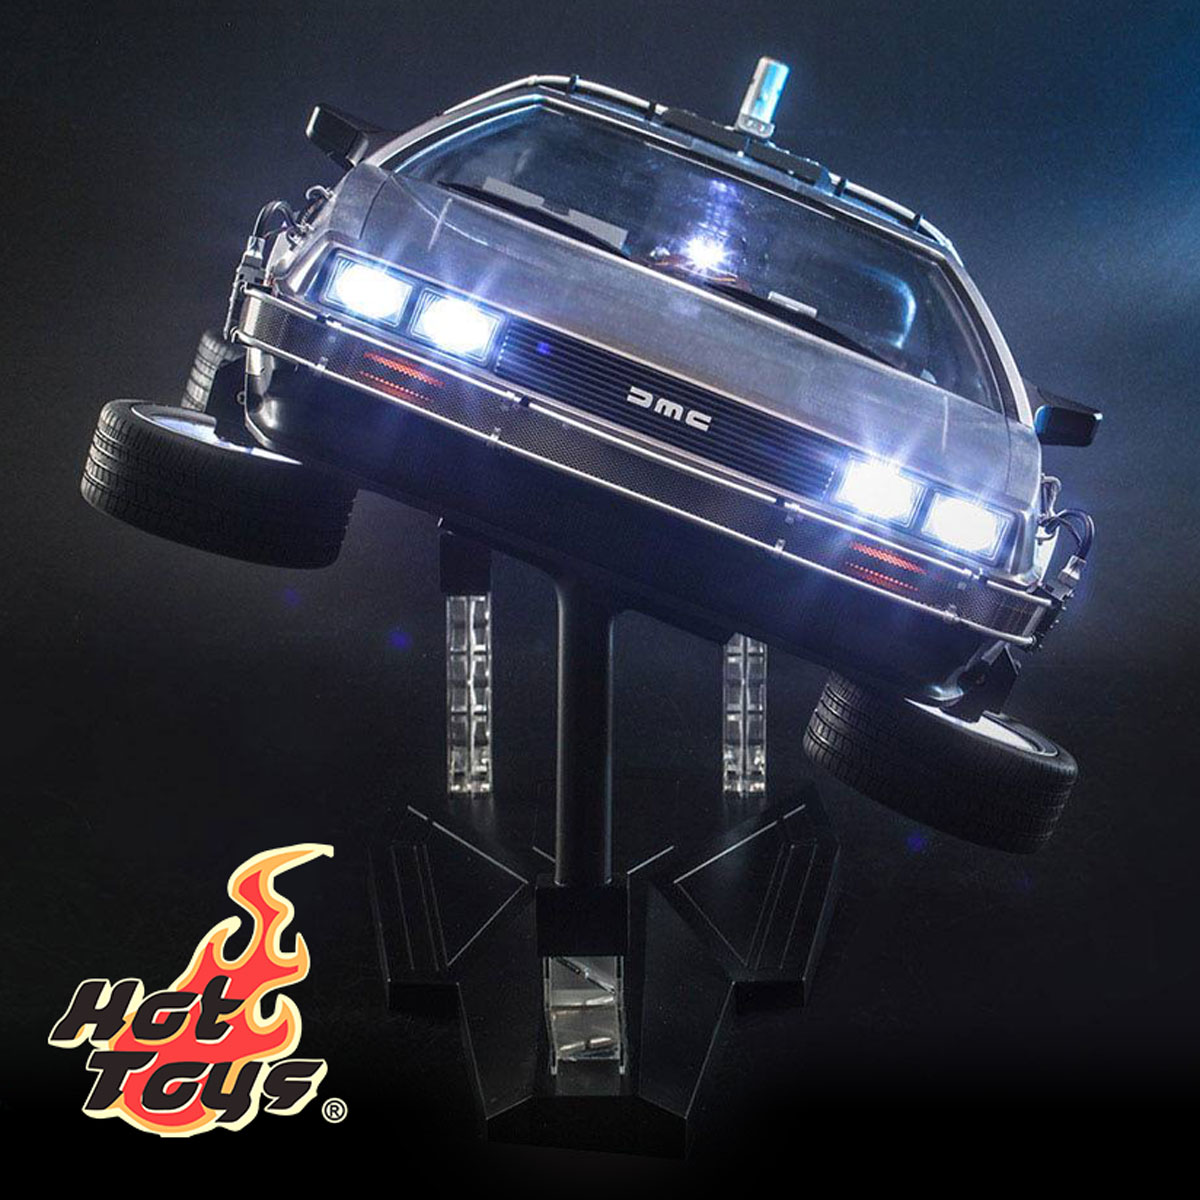 Hot Toys DeLorean Time Machine in hover mode from the front